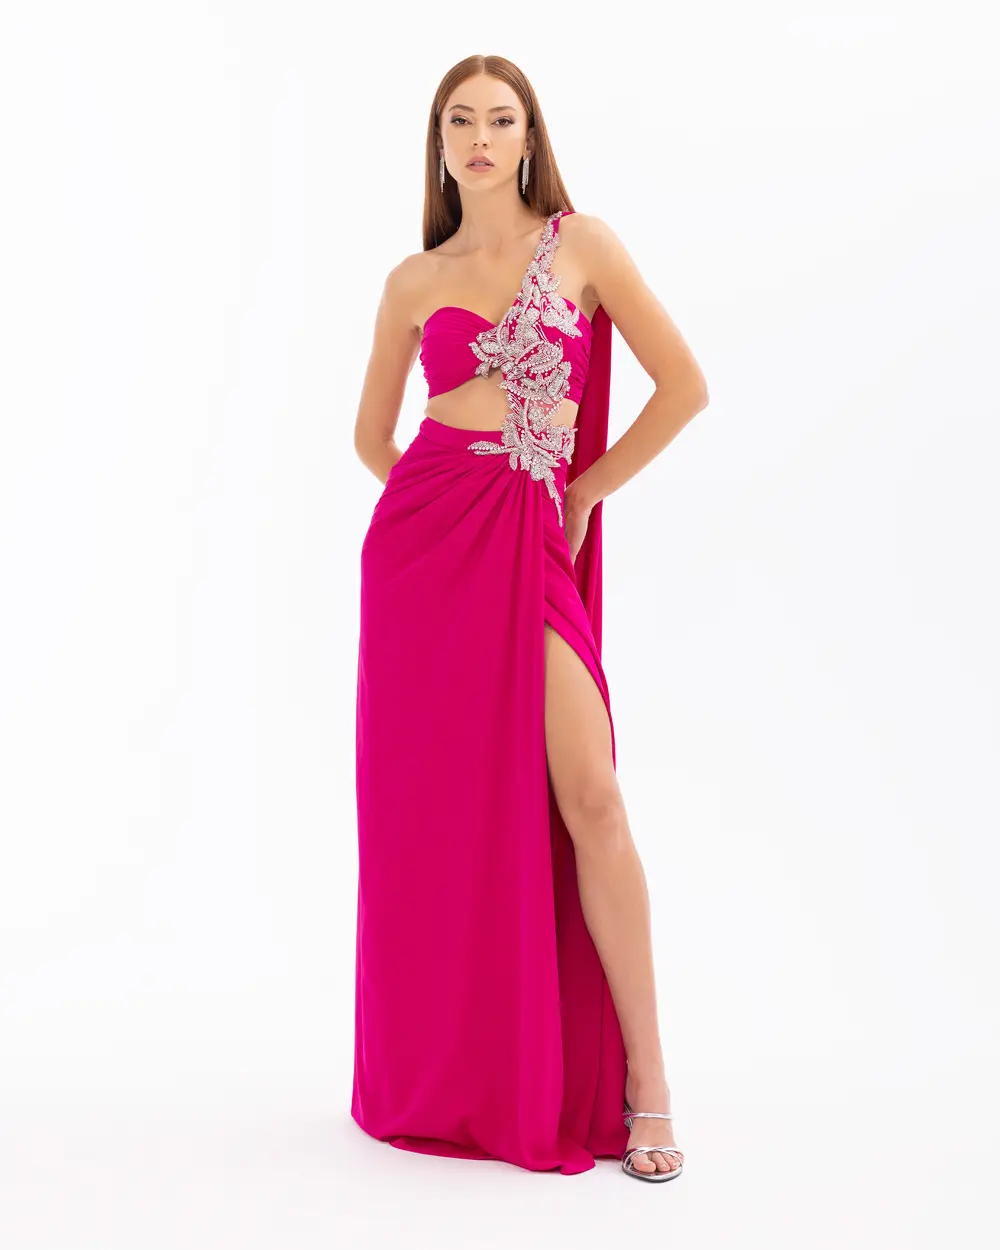 Strapless Satin Evening Dress with Indian Accessories